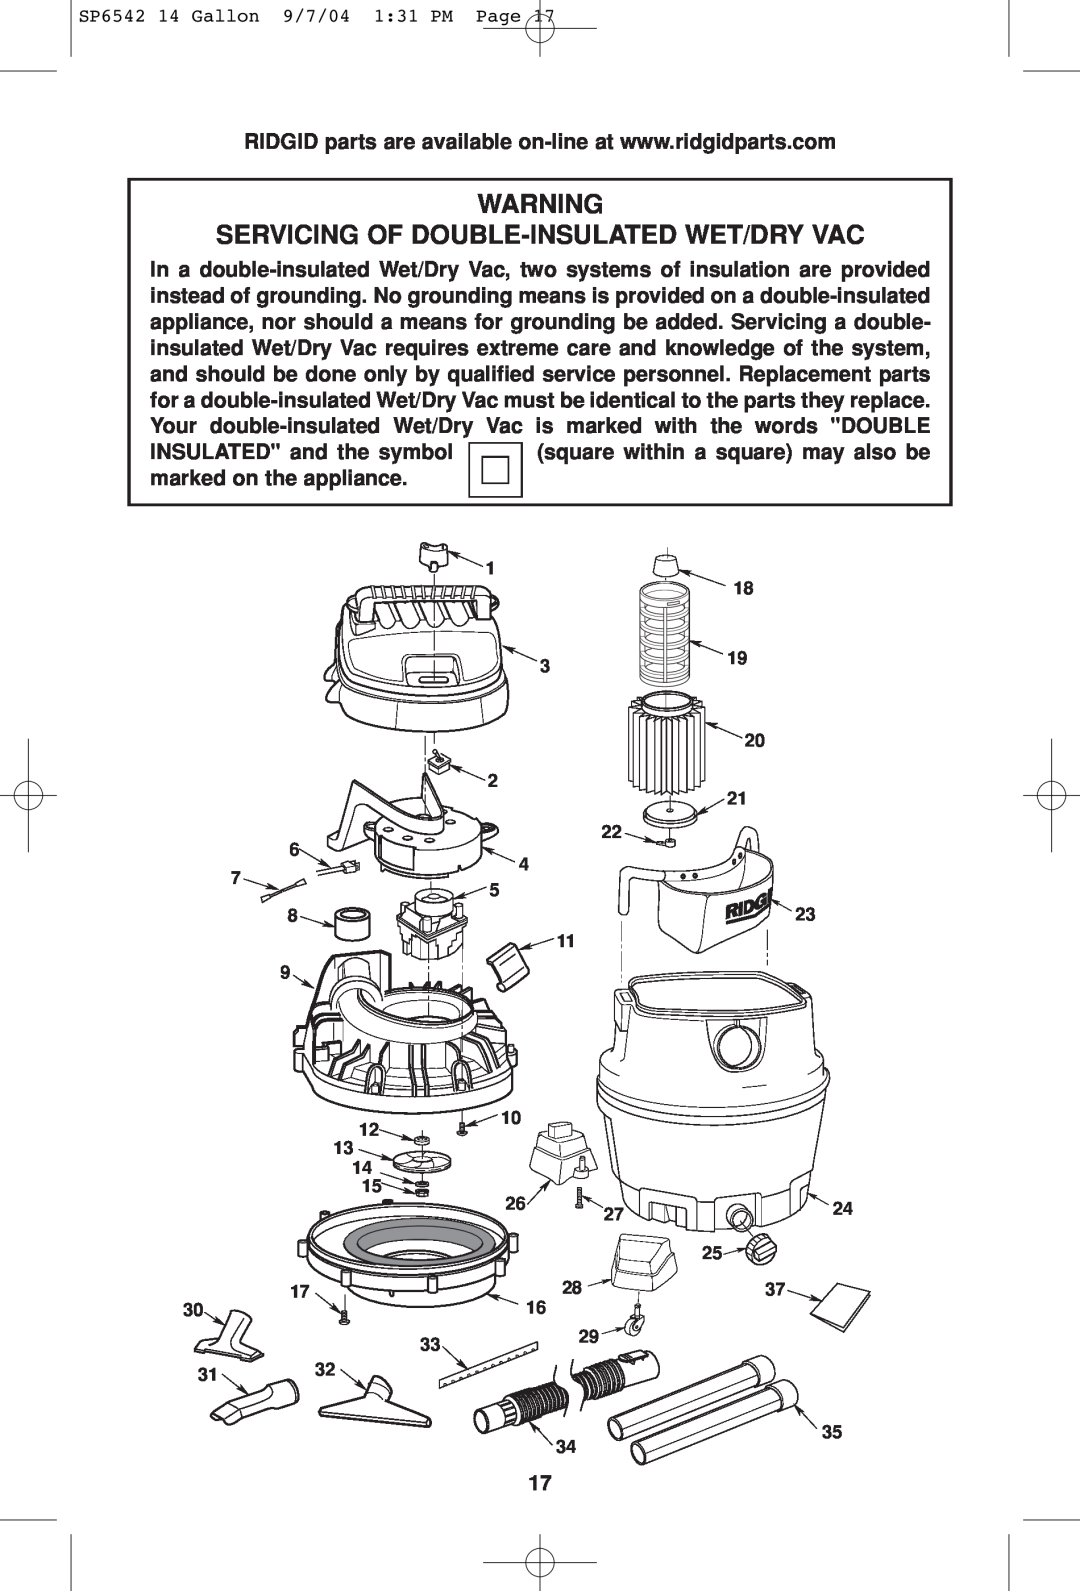 RIDGID WD1450 owner manual Servicing Of Double-Insulatedwet/Dry Vac 